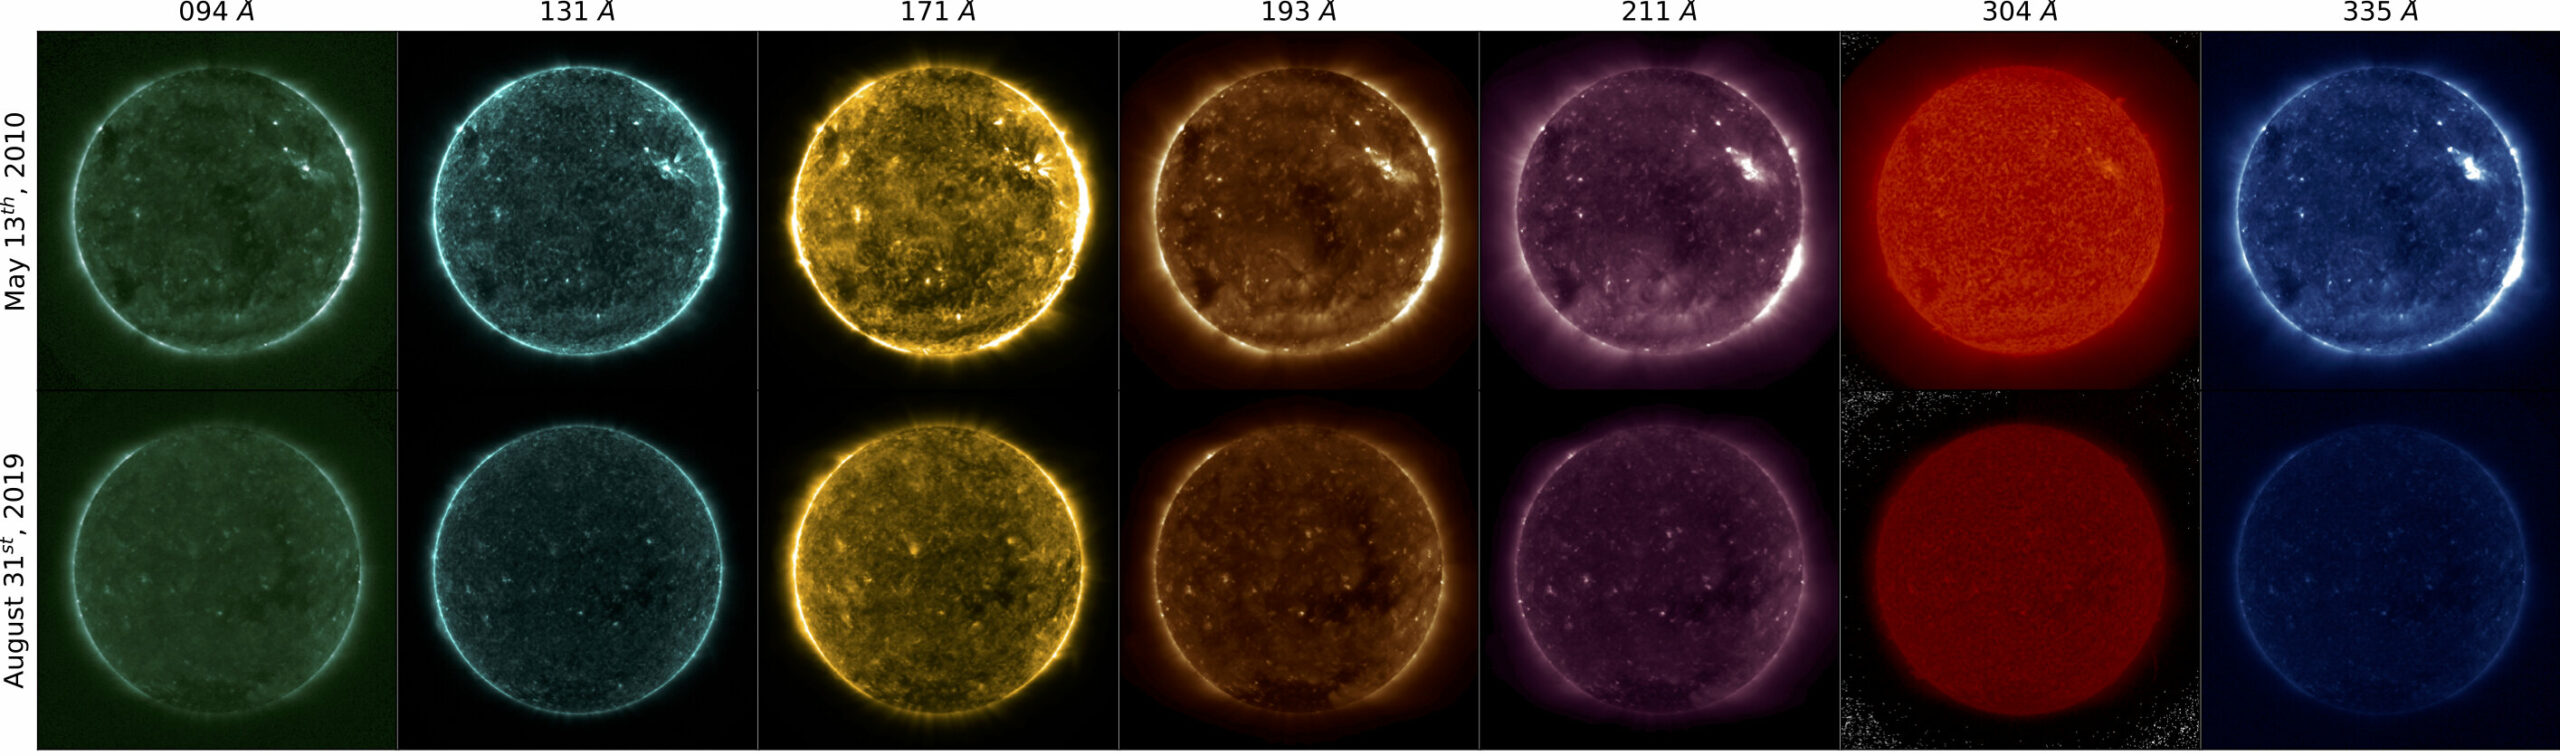 NASA's images of the Sun